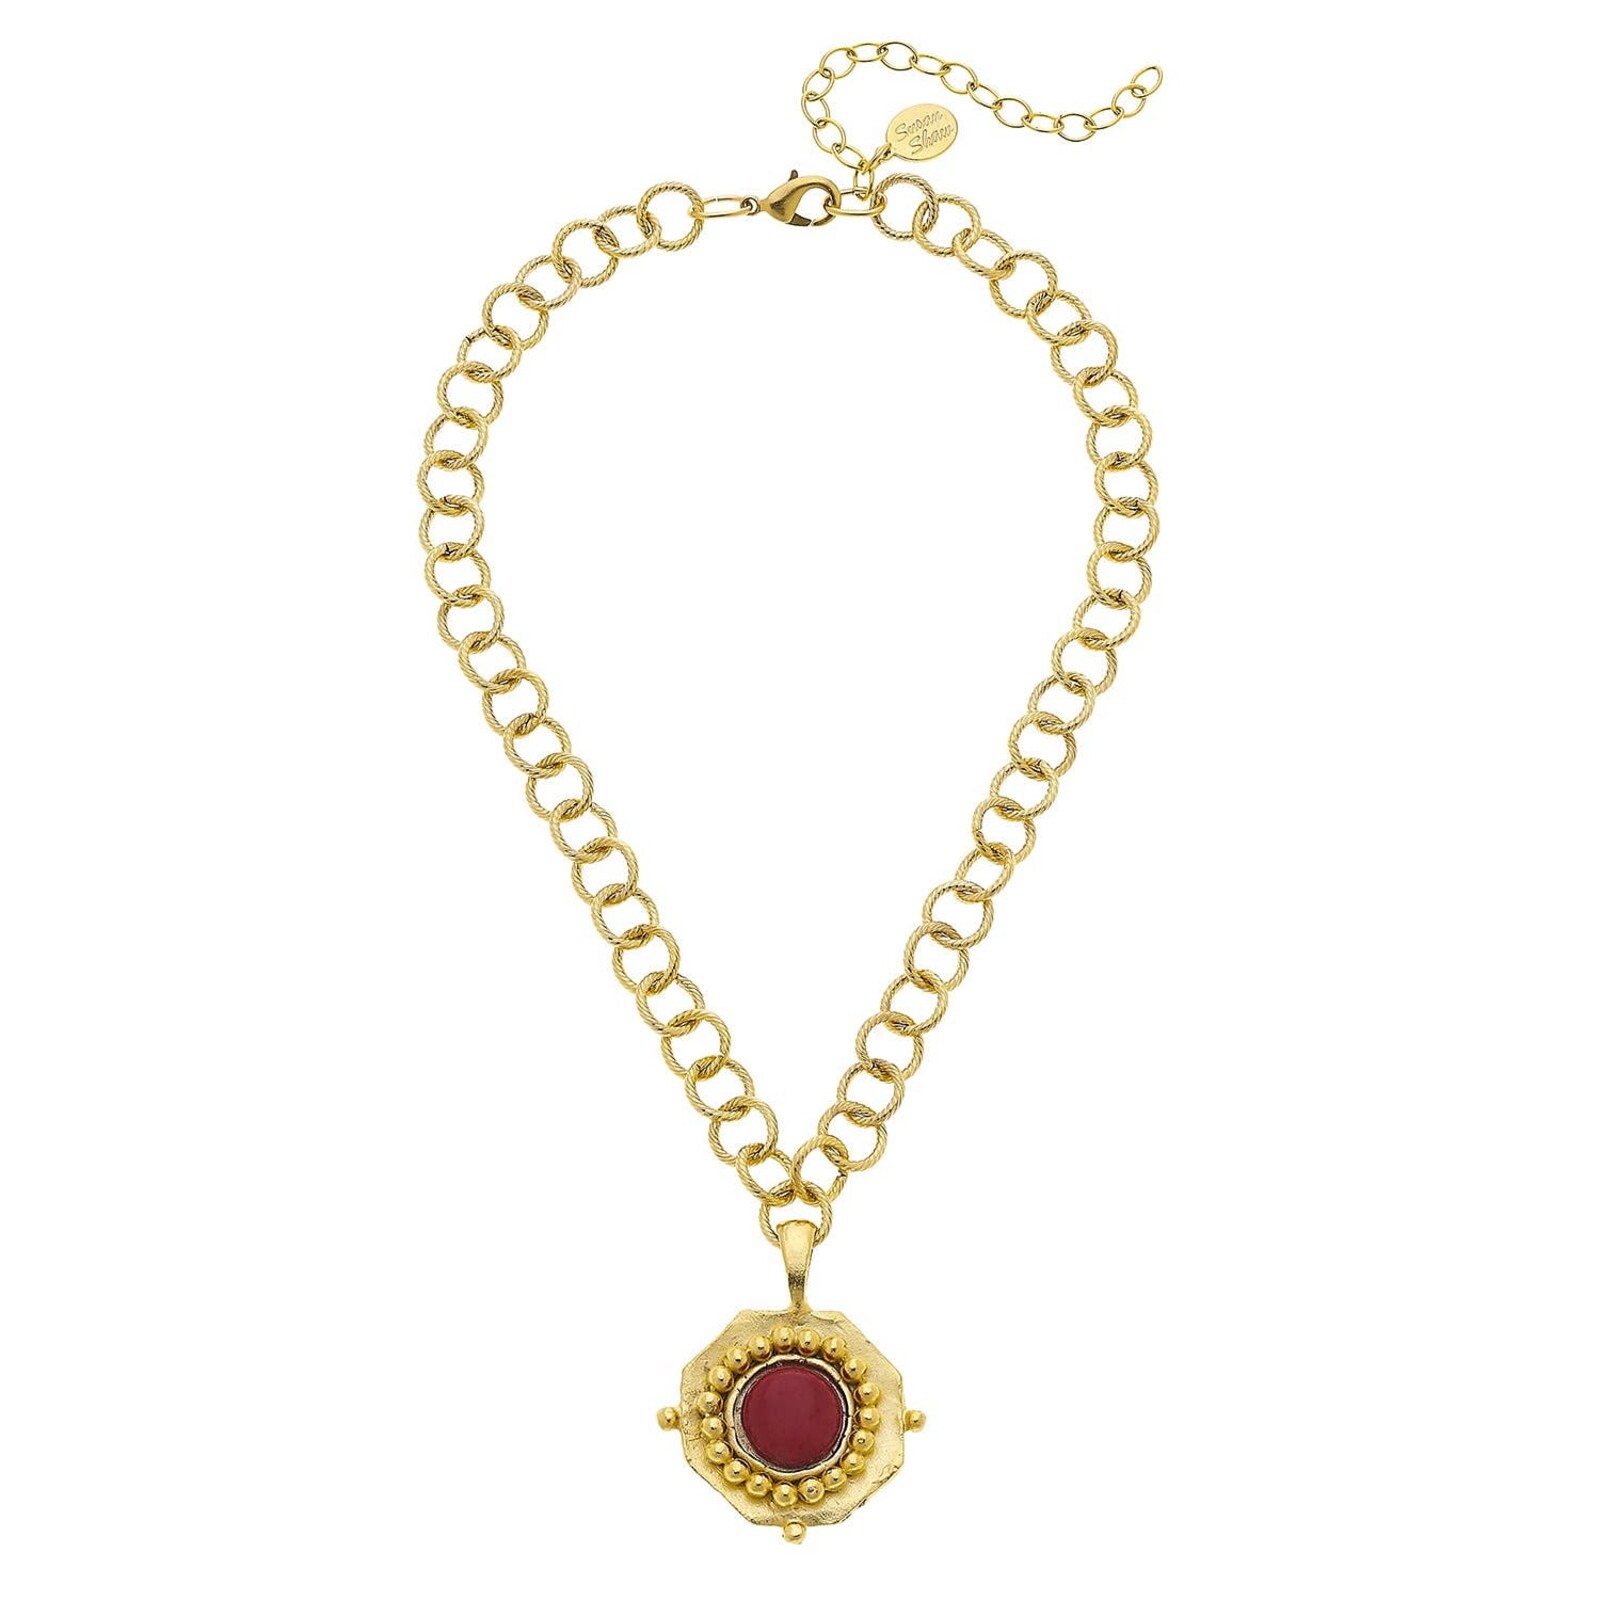 Susan Shaw Gold with Ruby Necklace  3950r loading=